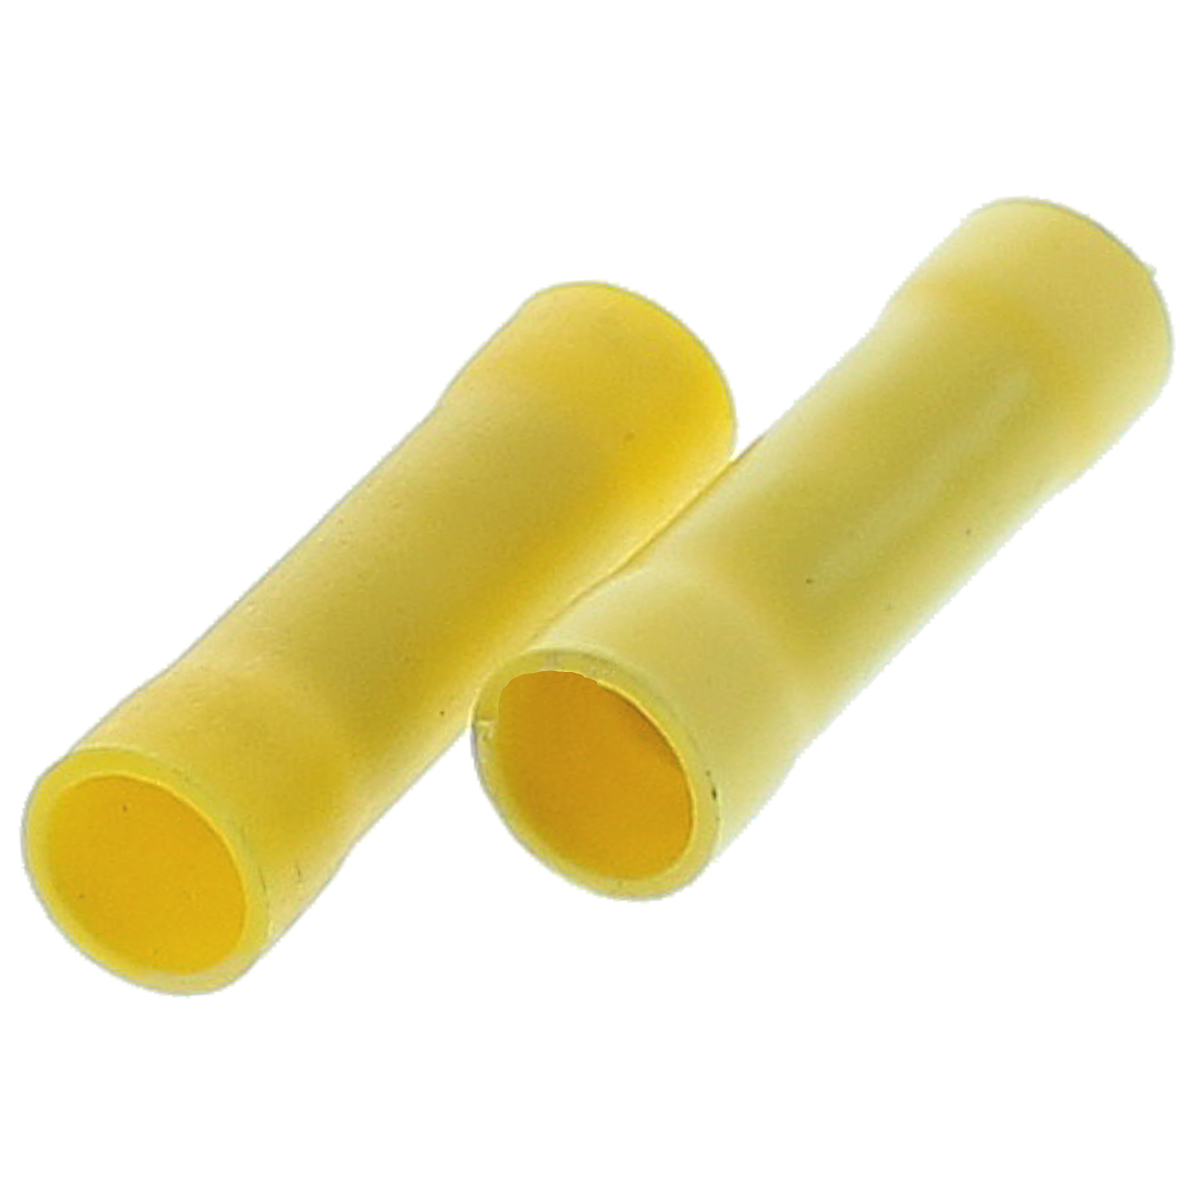 12-10 AWG Yellow Vinyl Flared Insulated Butt Connectors, 50/PKG